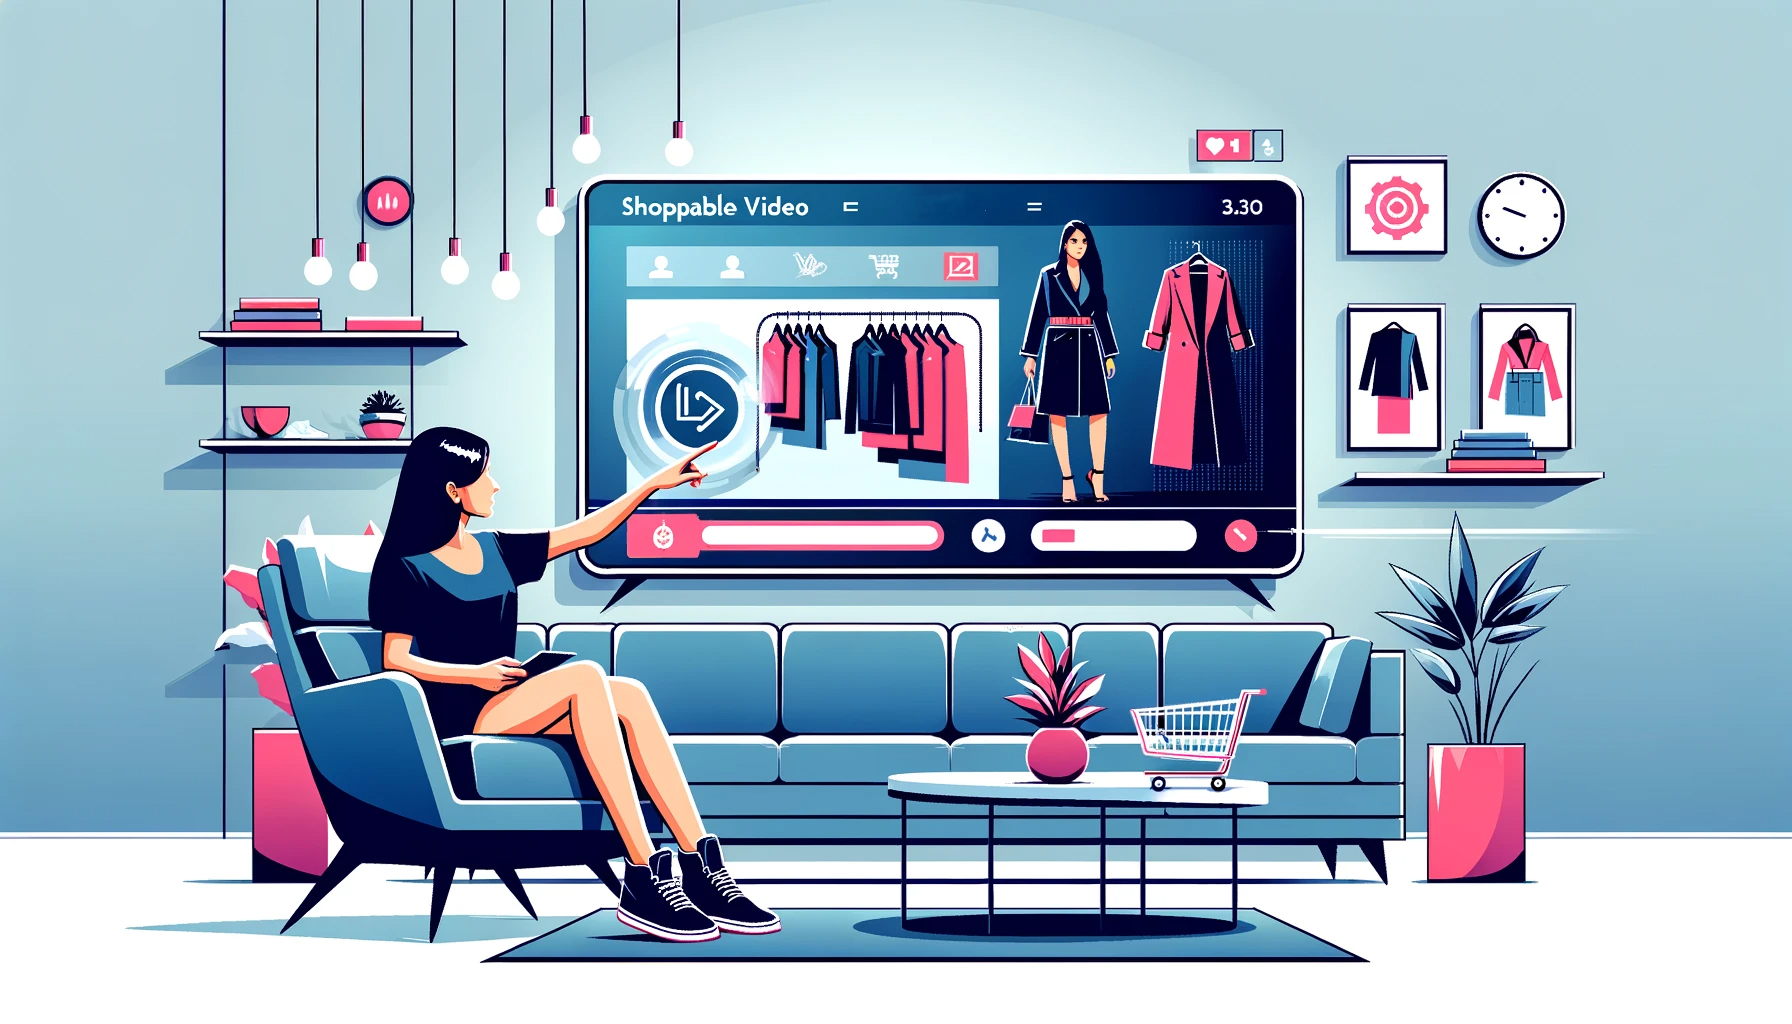 Benefits of Using Shoppable Videos in Ecommerce